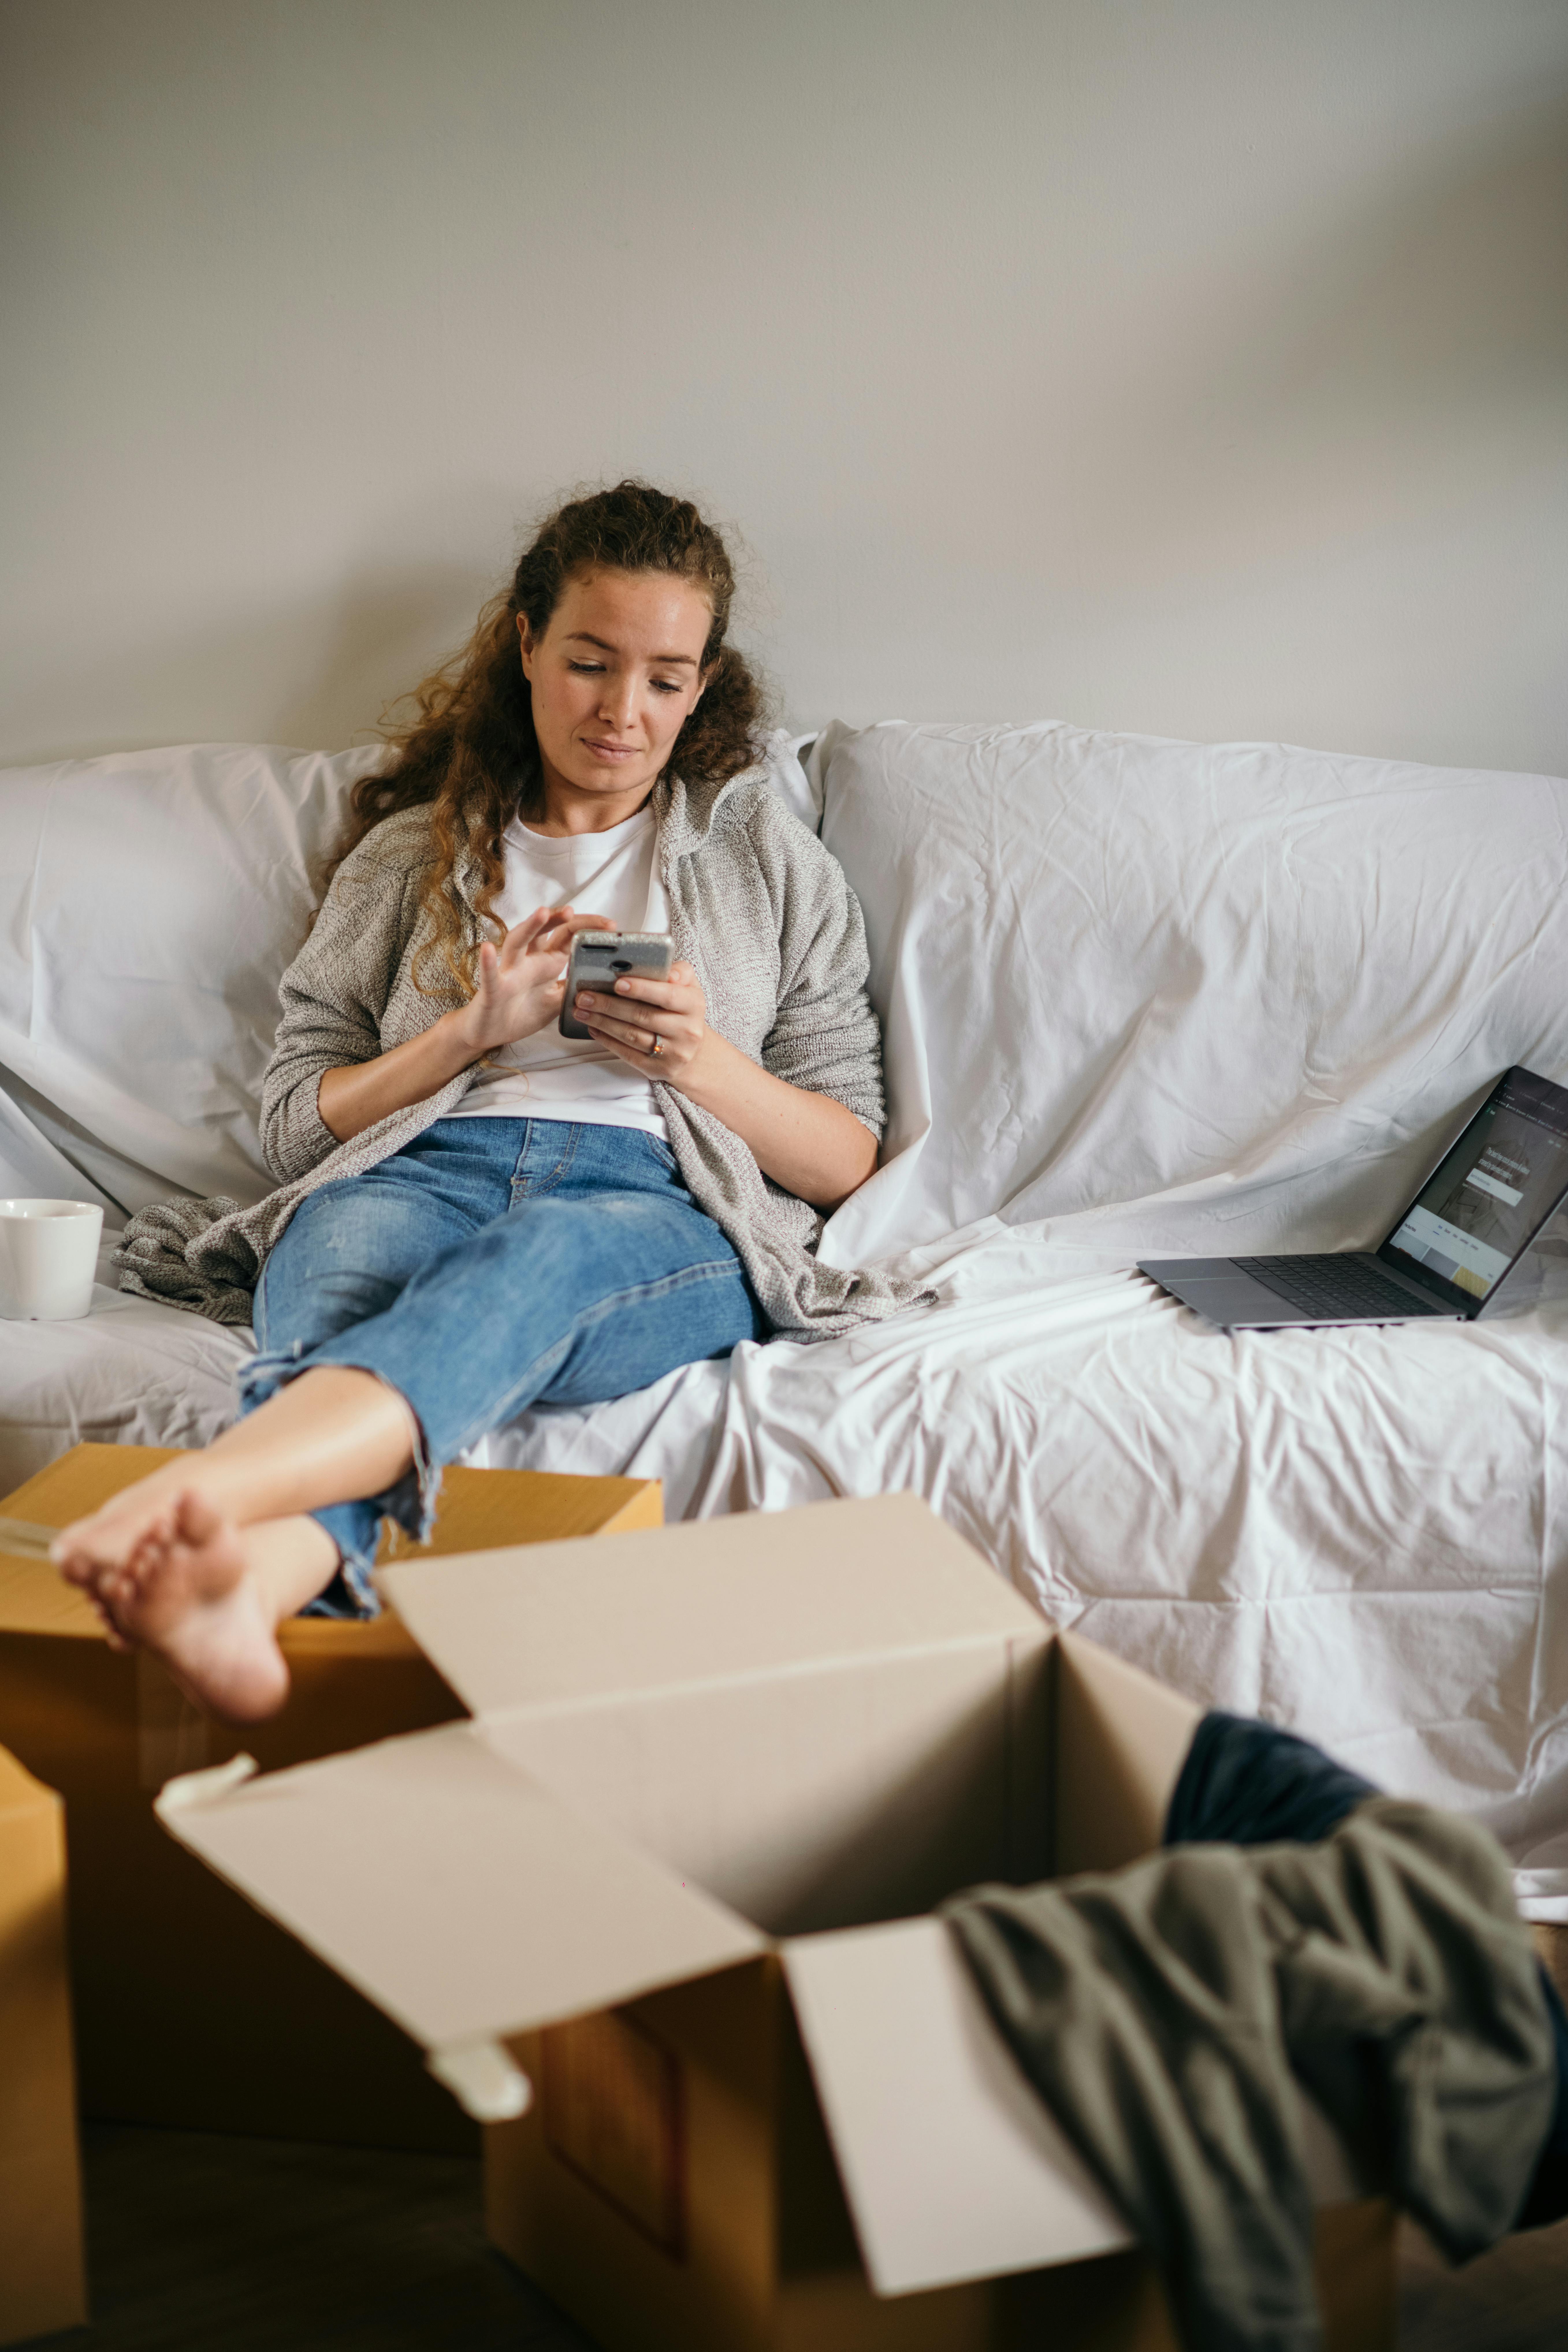 young woman sitting on couch and using smartphone in new house with cardboard boxes